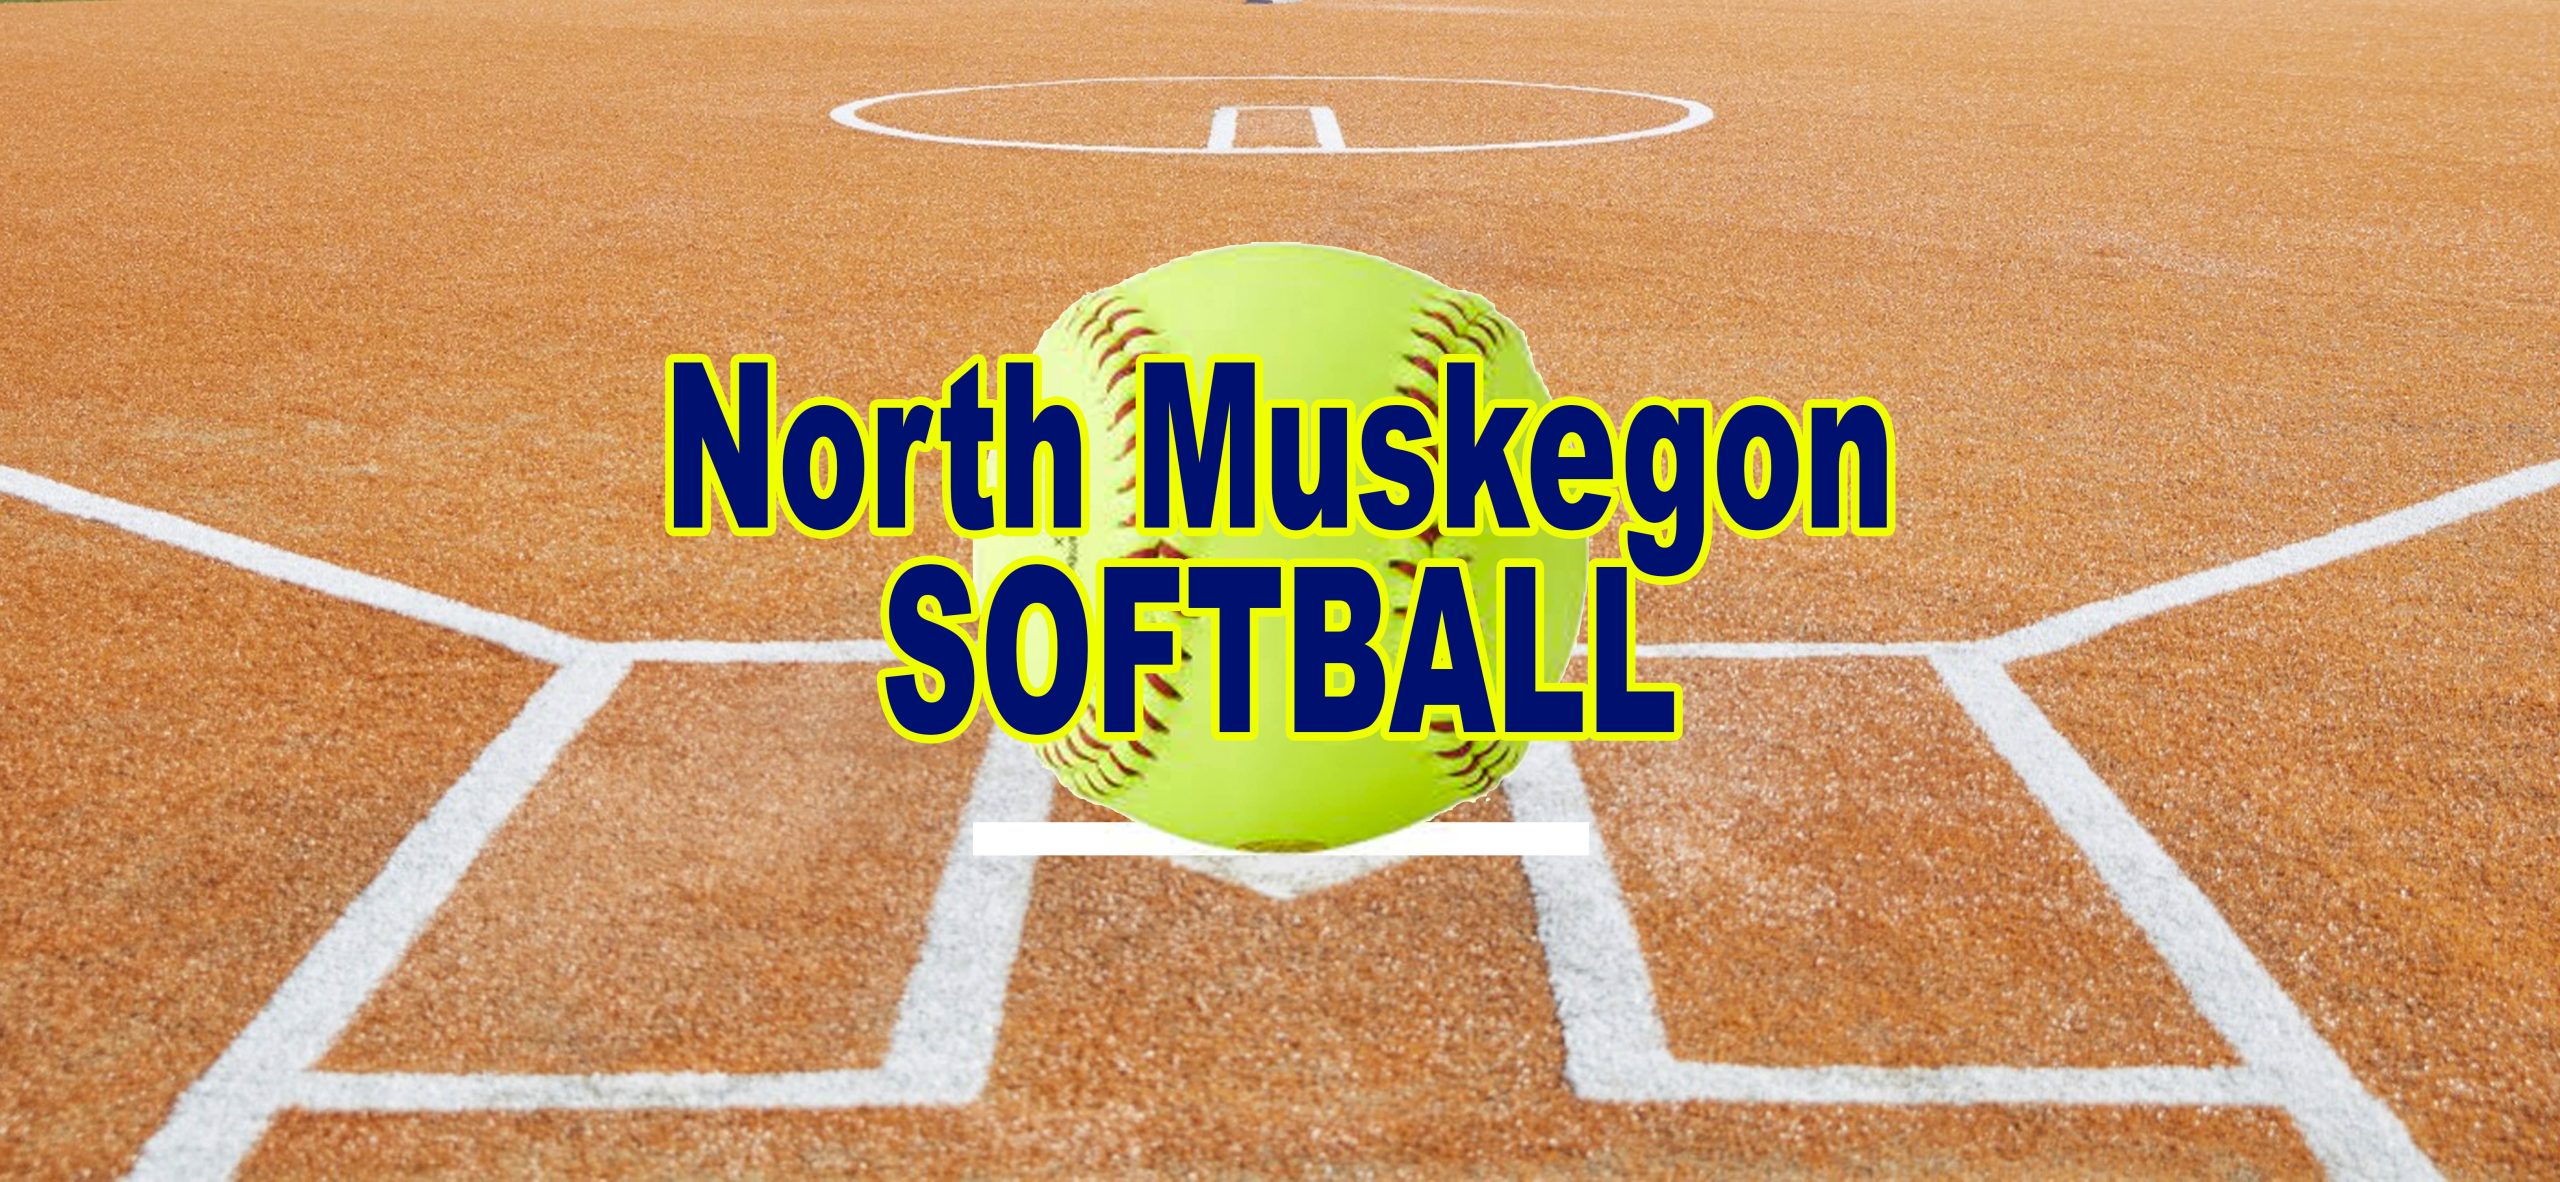 Baker records perfect game, while Balon throws a no-hitter as Norse softball team blanks Hesperia